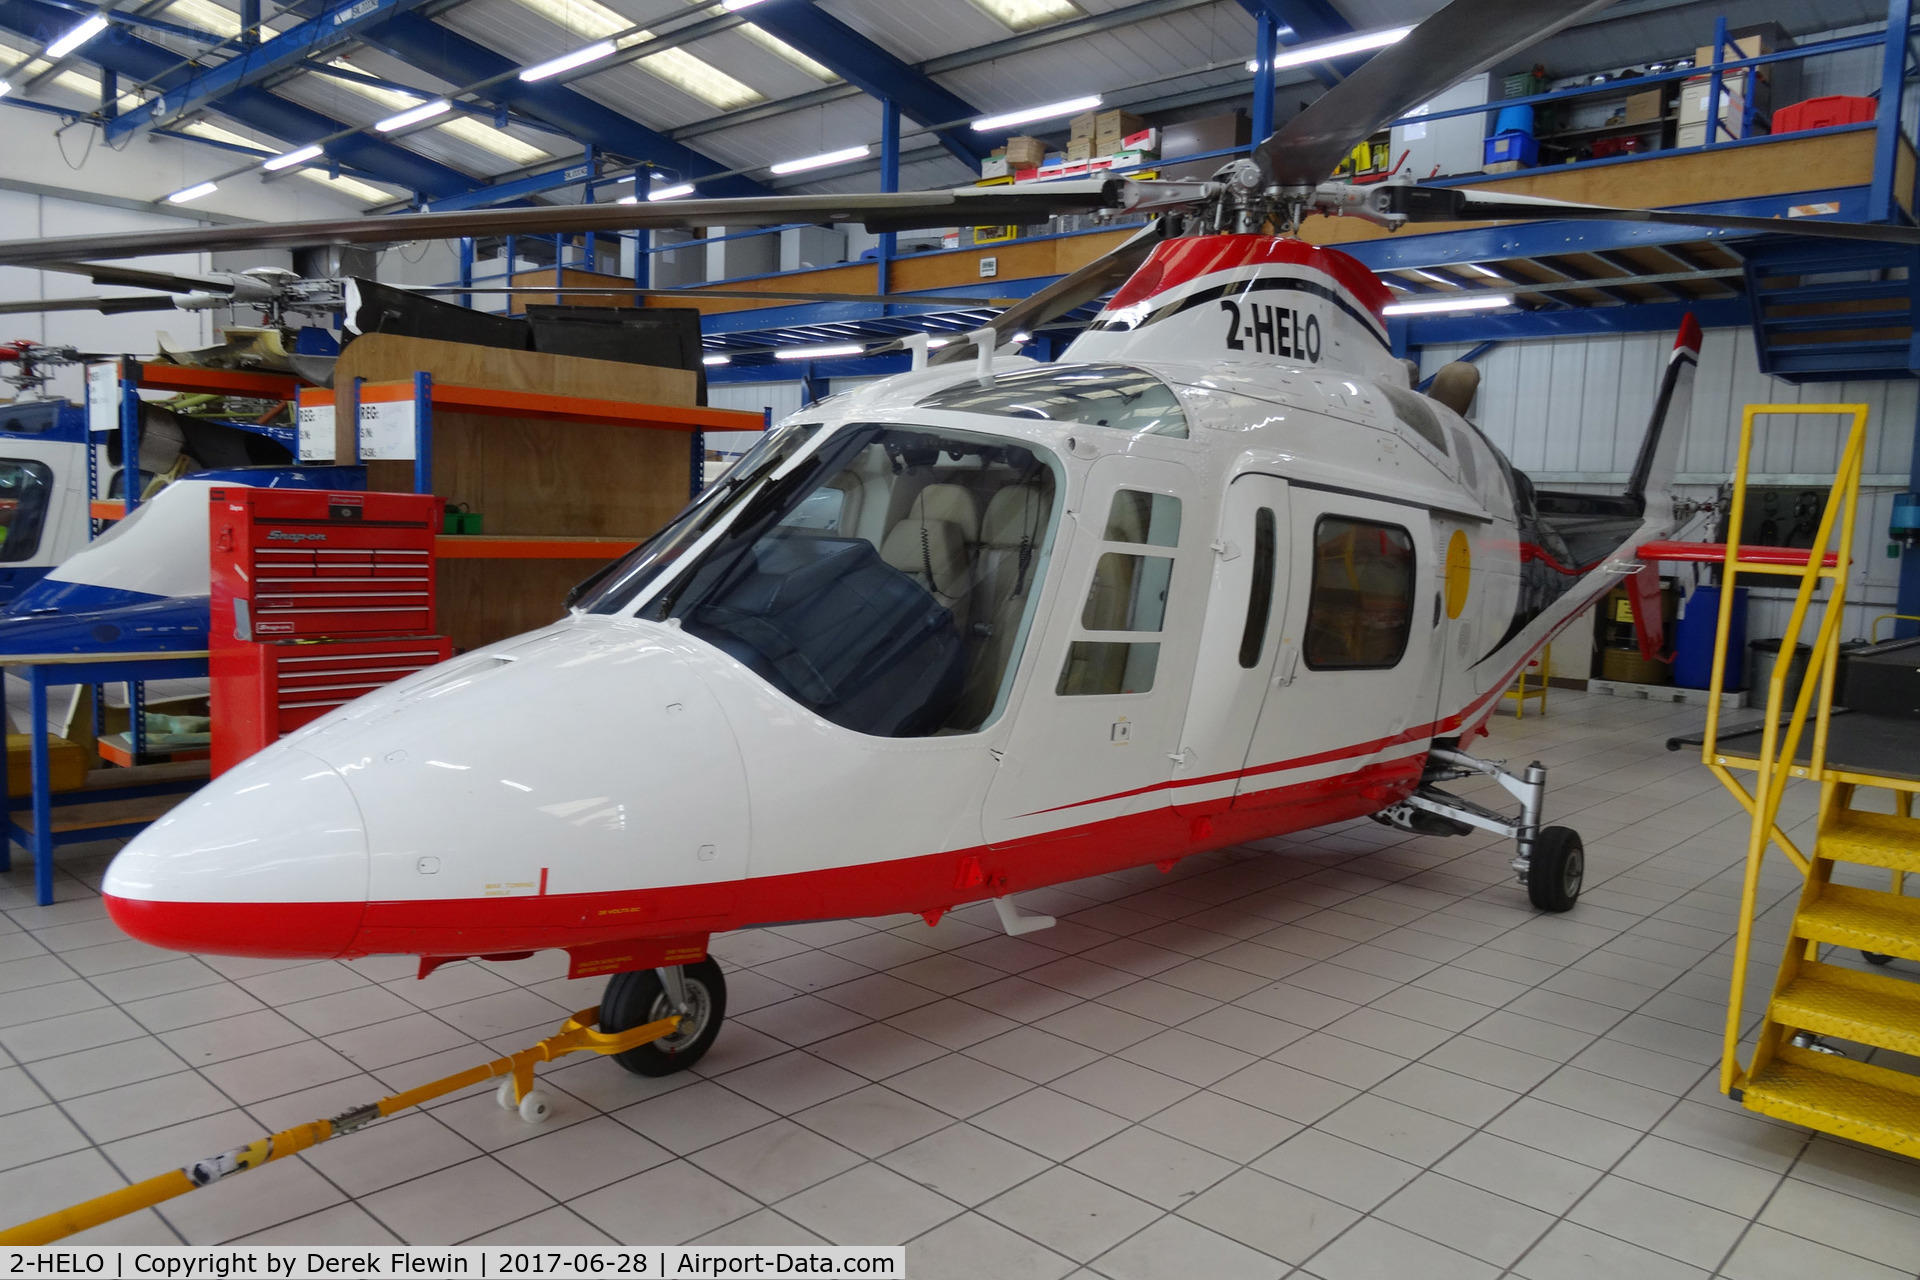 2-HELO, 1995 Agusta A-109C C/N 7630, A-109C, previously G-ONEL, VH-LUI, G-JBEK, G-ONEL, S7-NEL, N502JH, ZS-HJD.